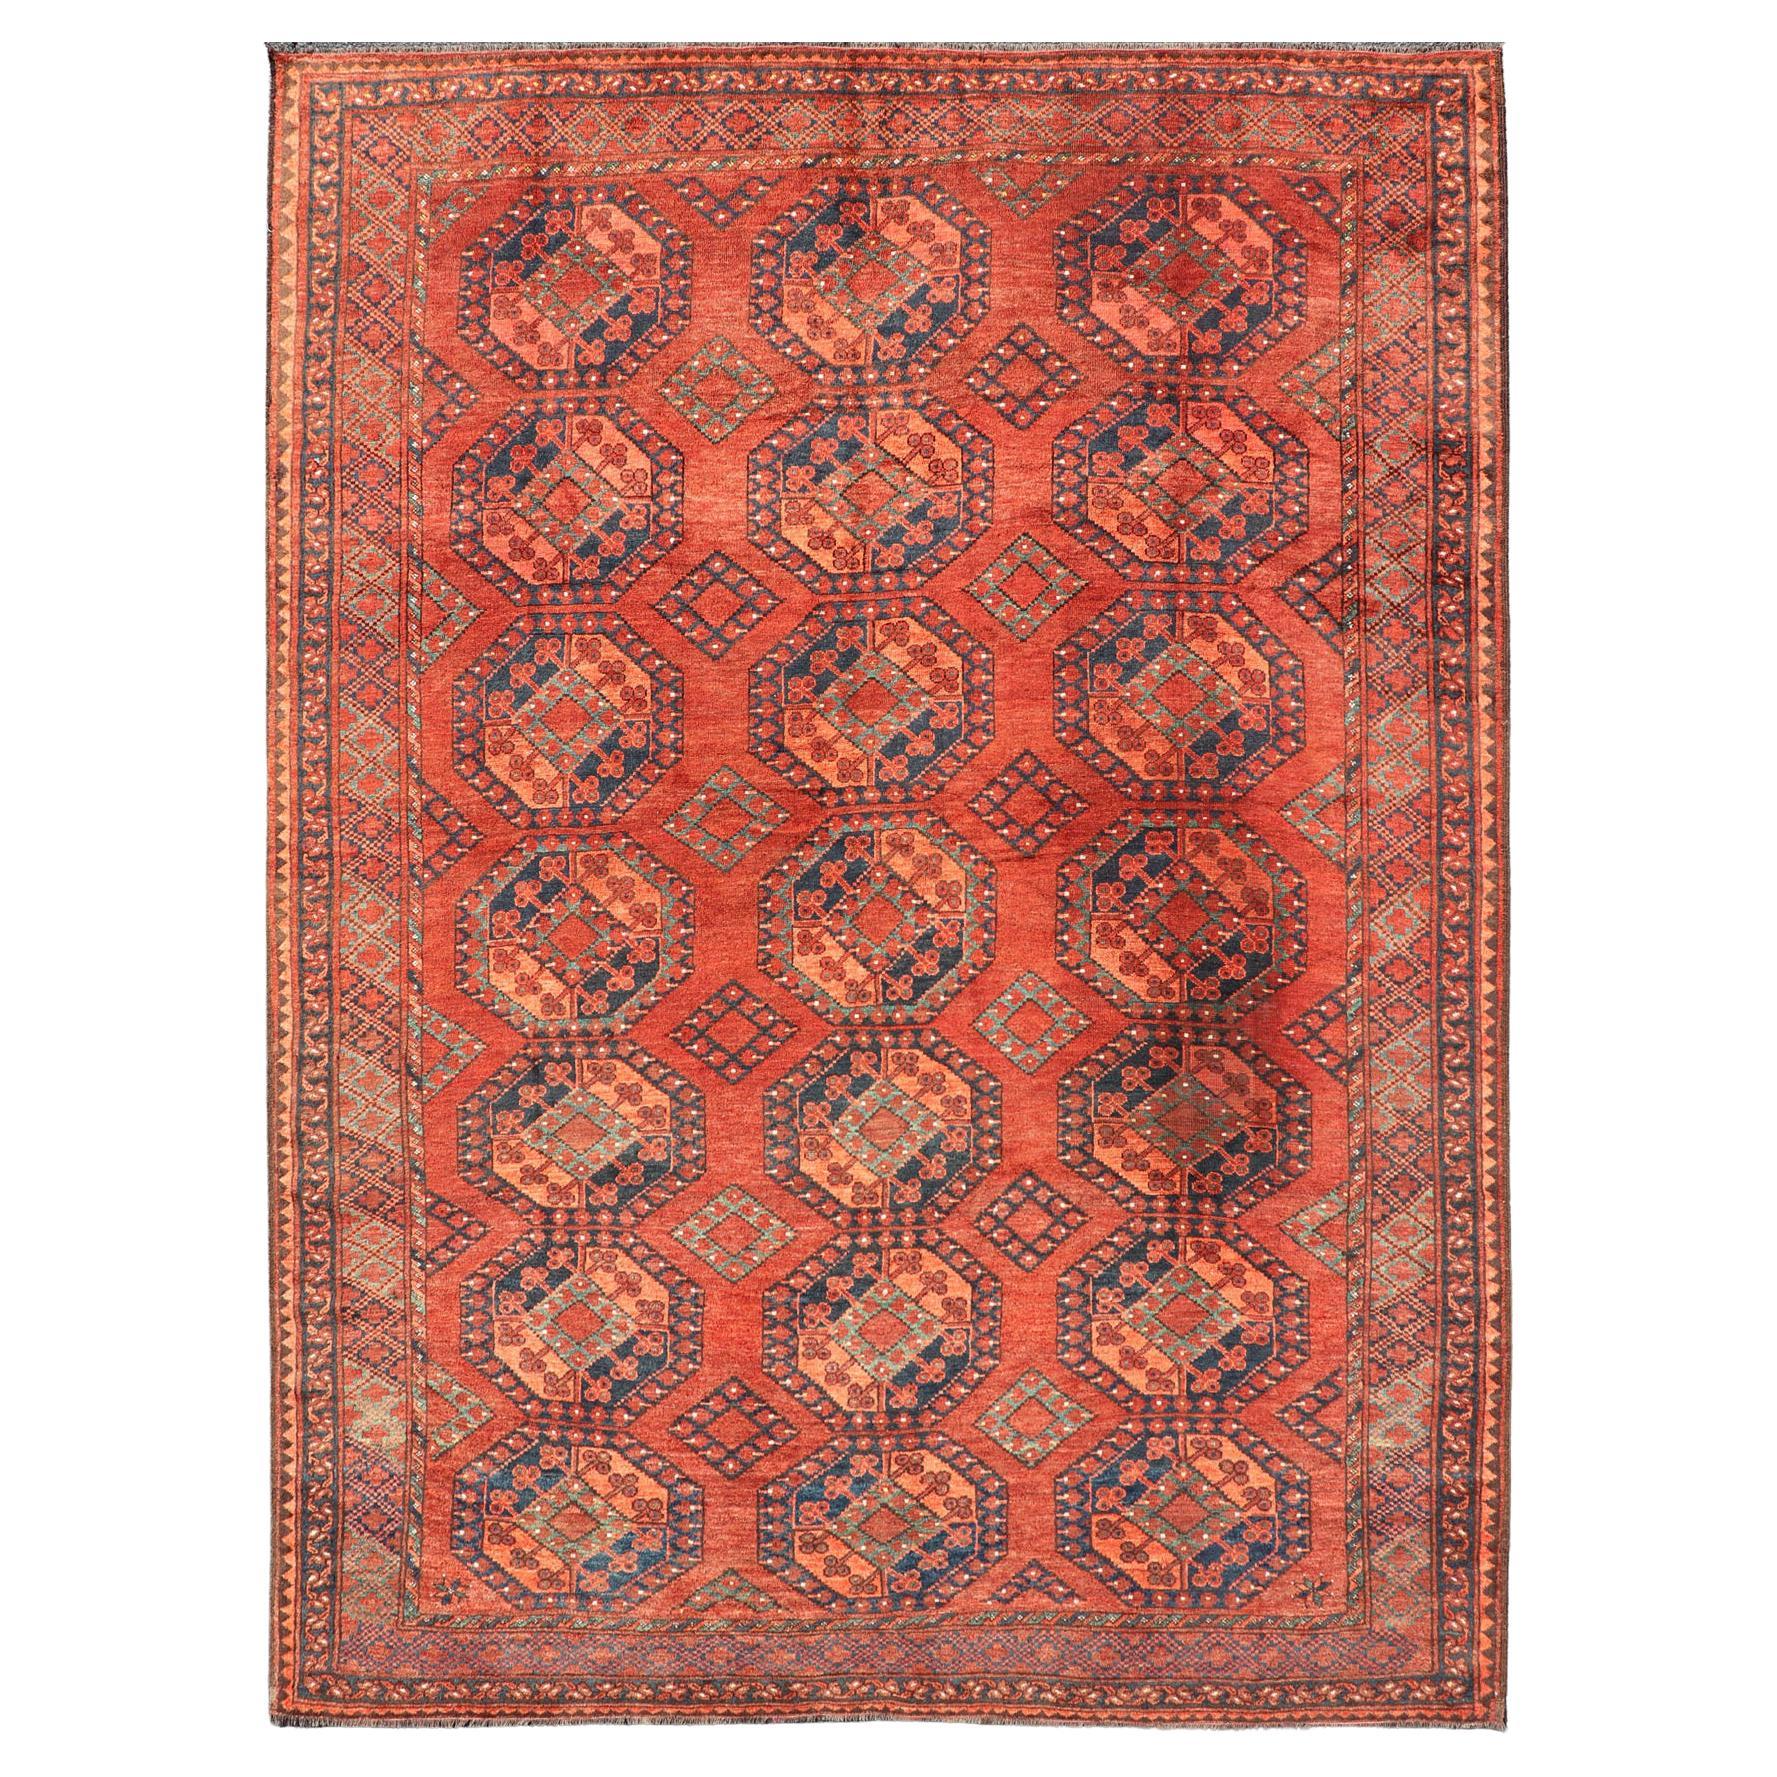 Early 20th Century Hand-Knotted Turkomen Ersari Rug in Wool with Gul Design